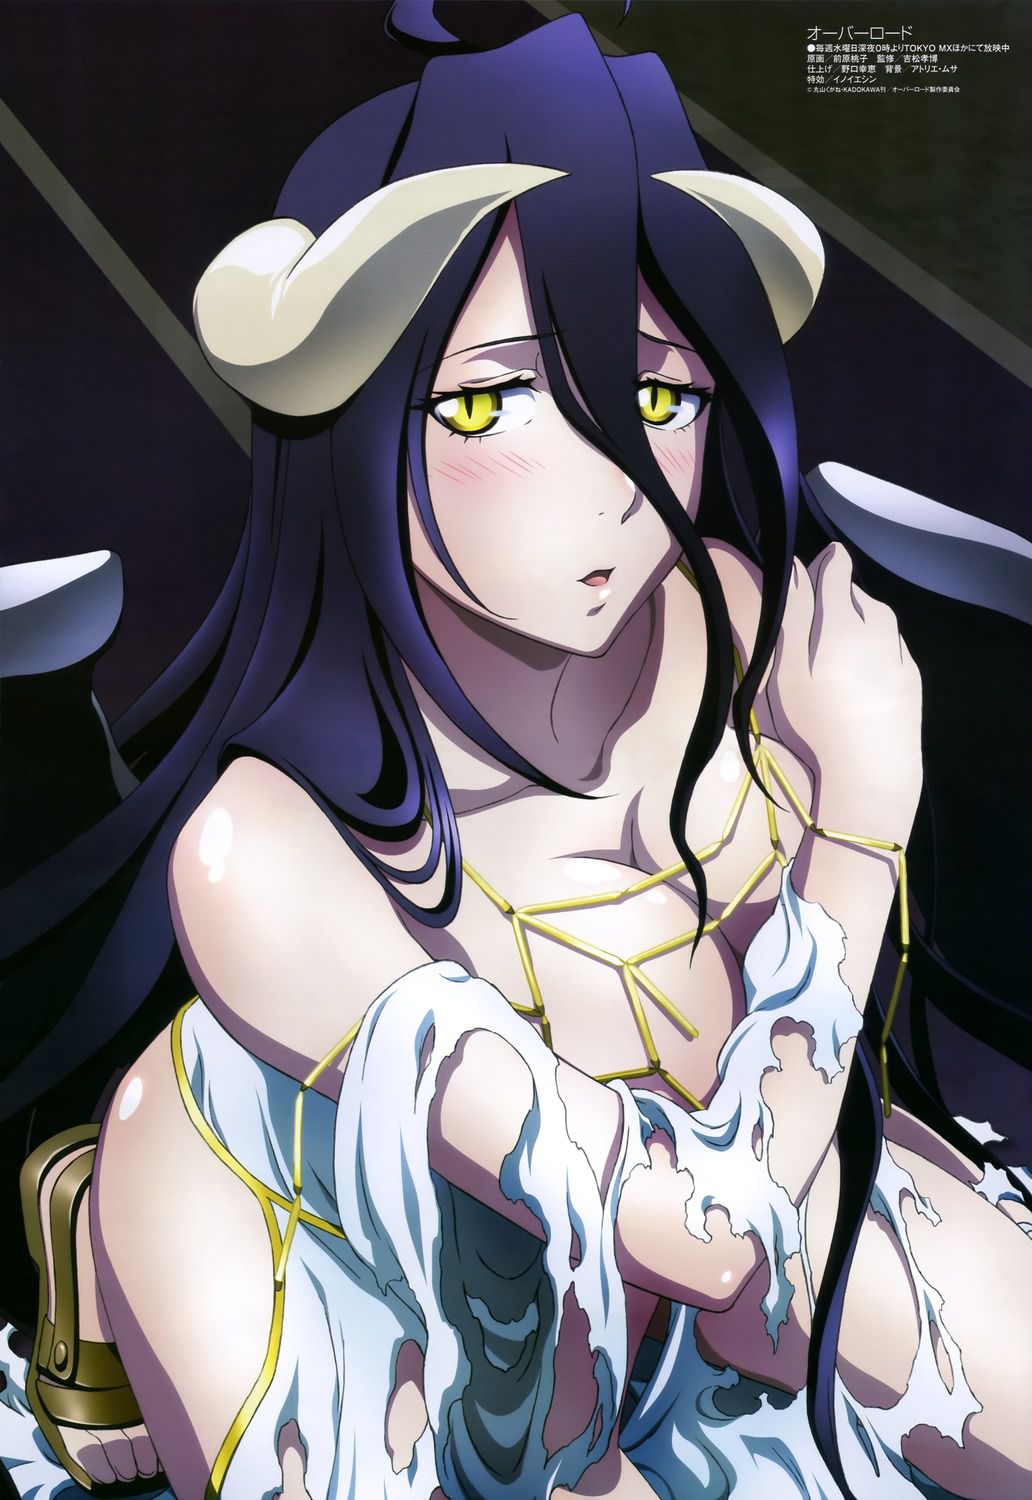 Albedo's official illustration image of Overlord is too erotic wwwwww 6